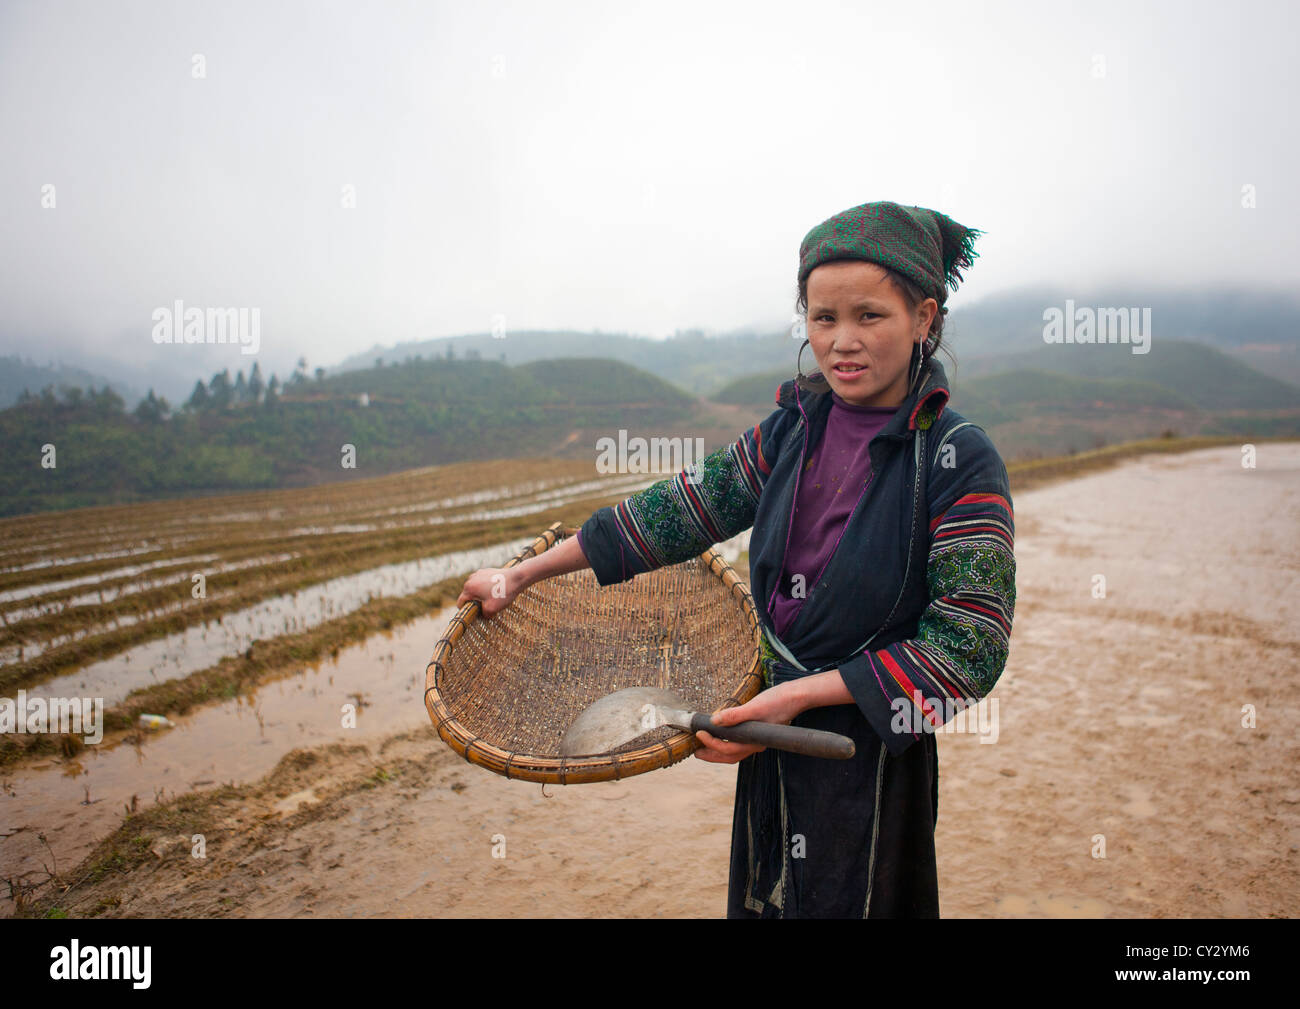 Black Hmong Woman Showing The Rice She Picked Up, Sapa, Vietnam Stock Photo